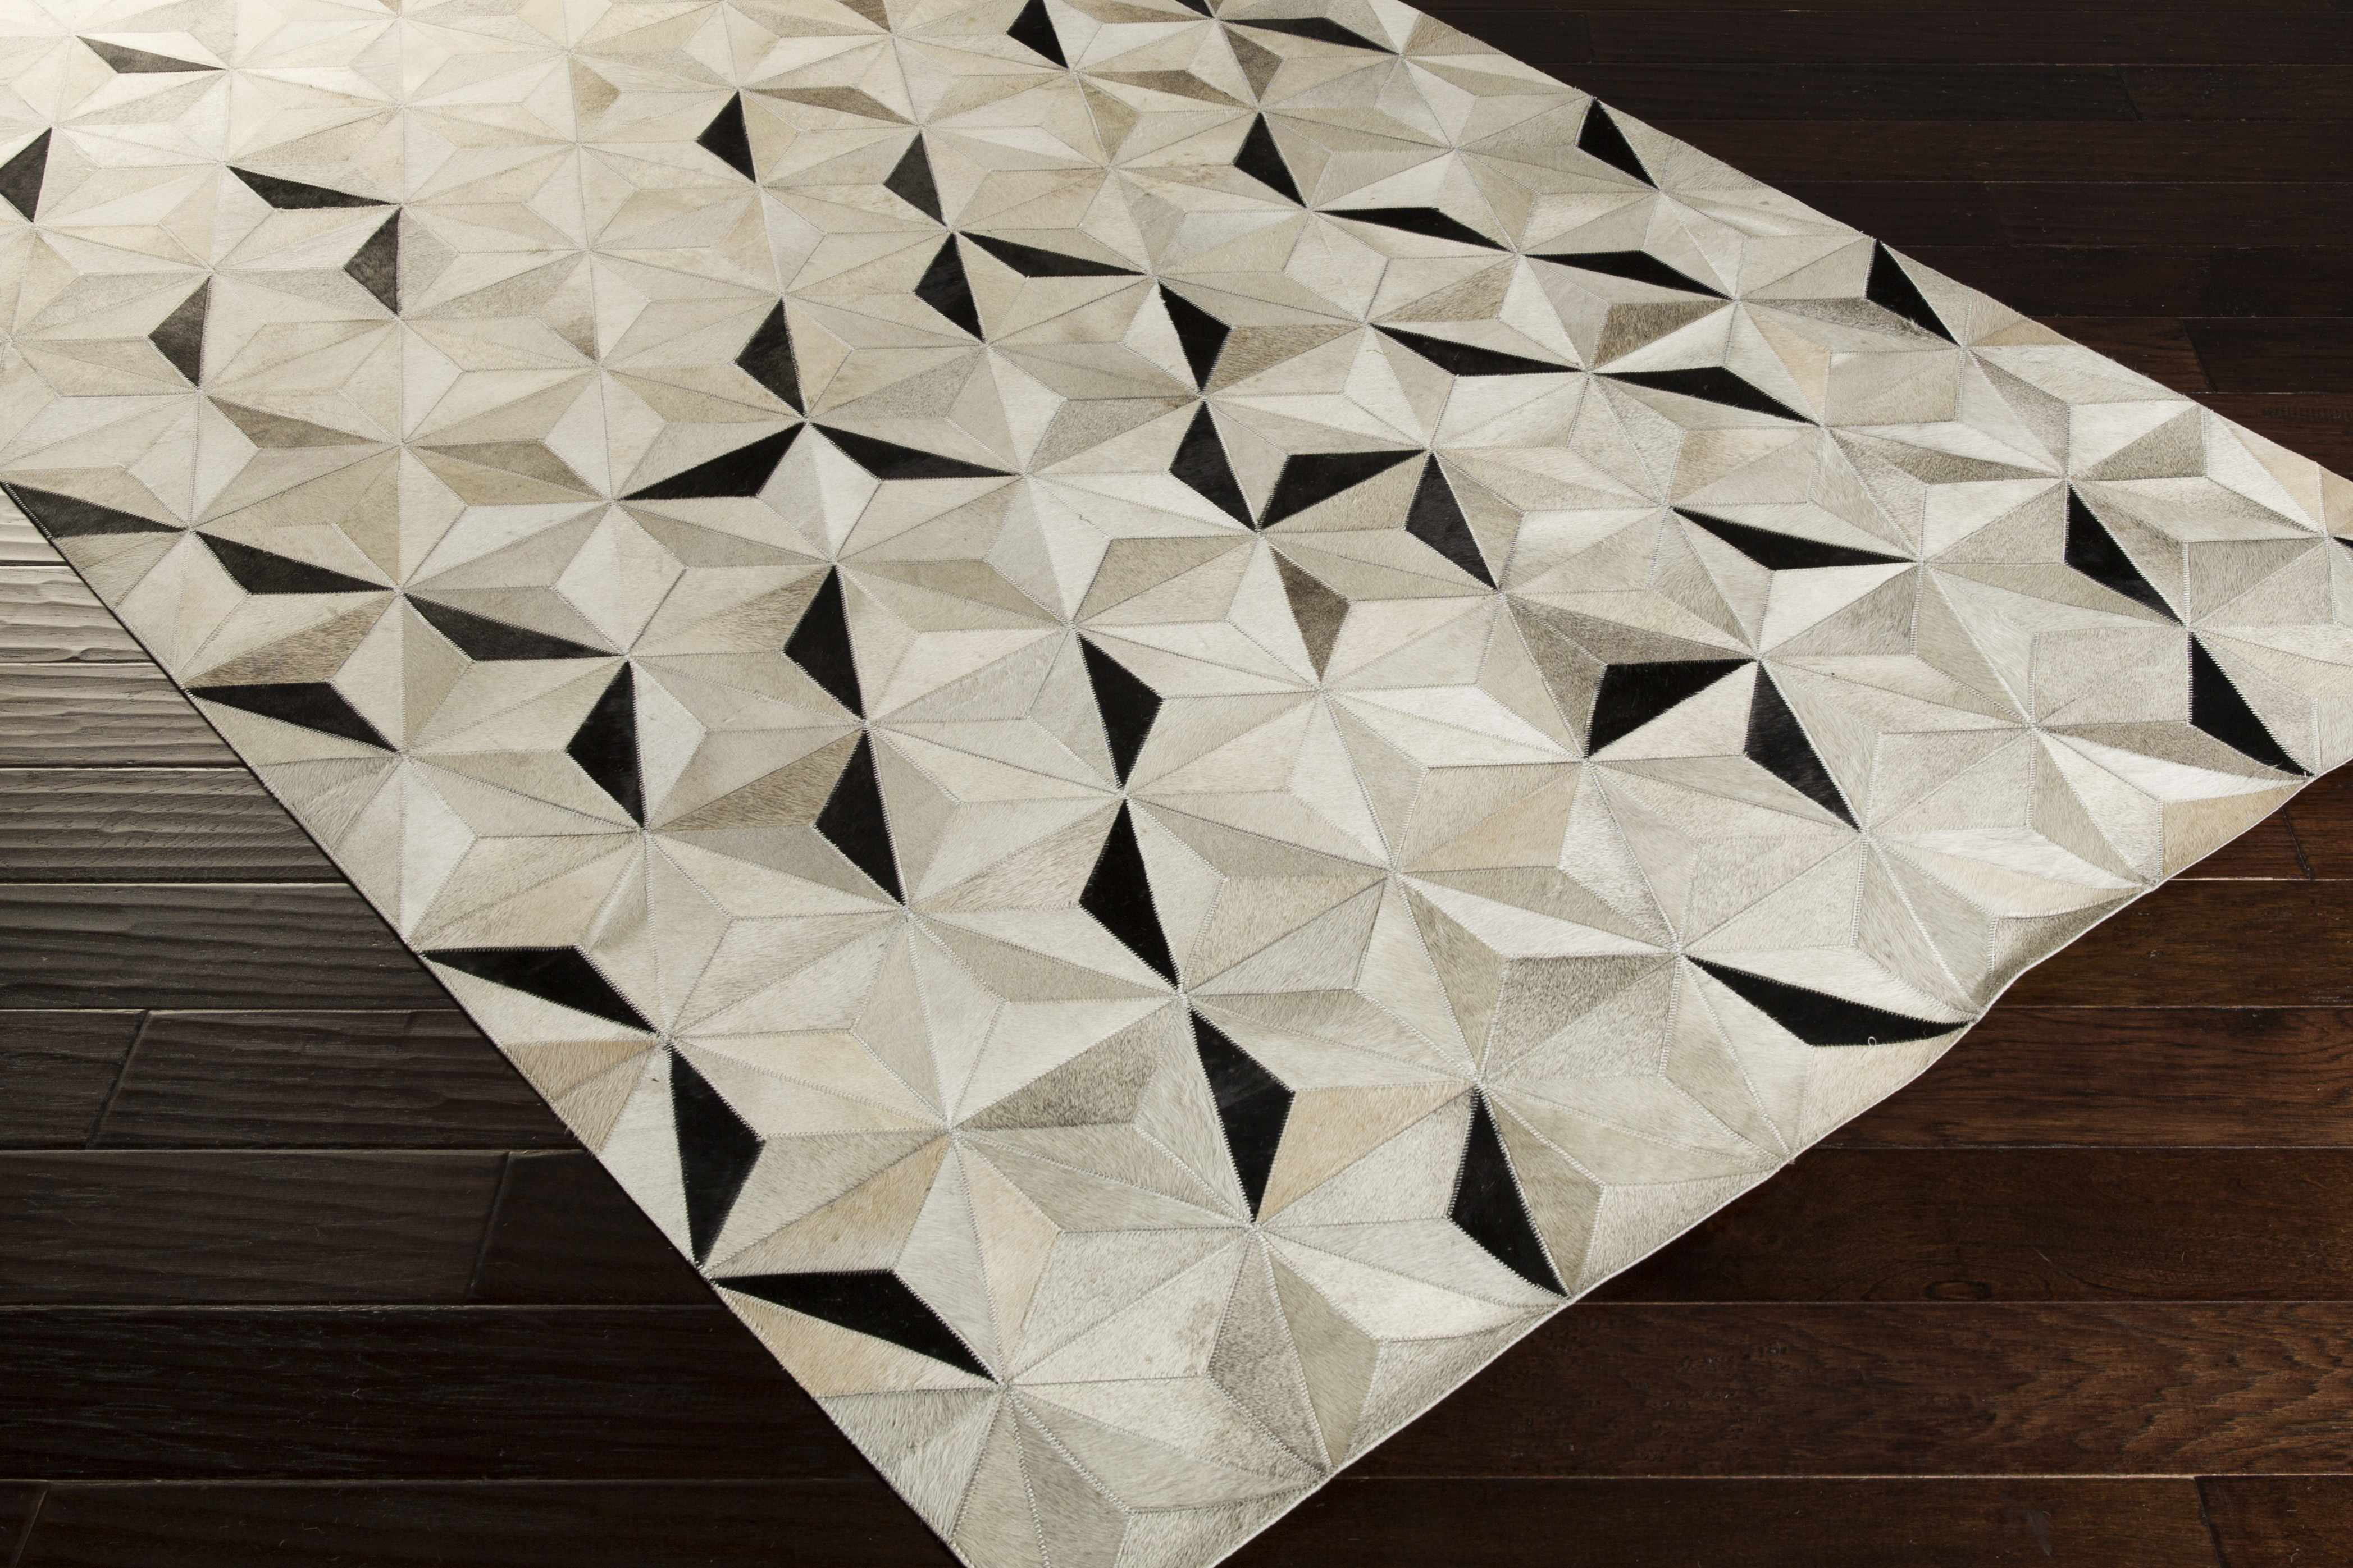 Veyo 8' x 10' Hides and Leather Cowhide Leather Area Rug - Hauteloom